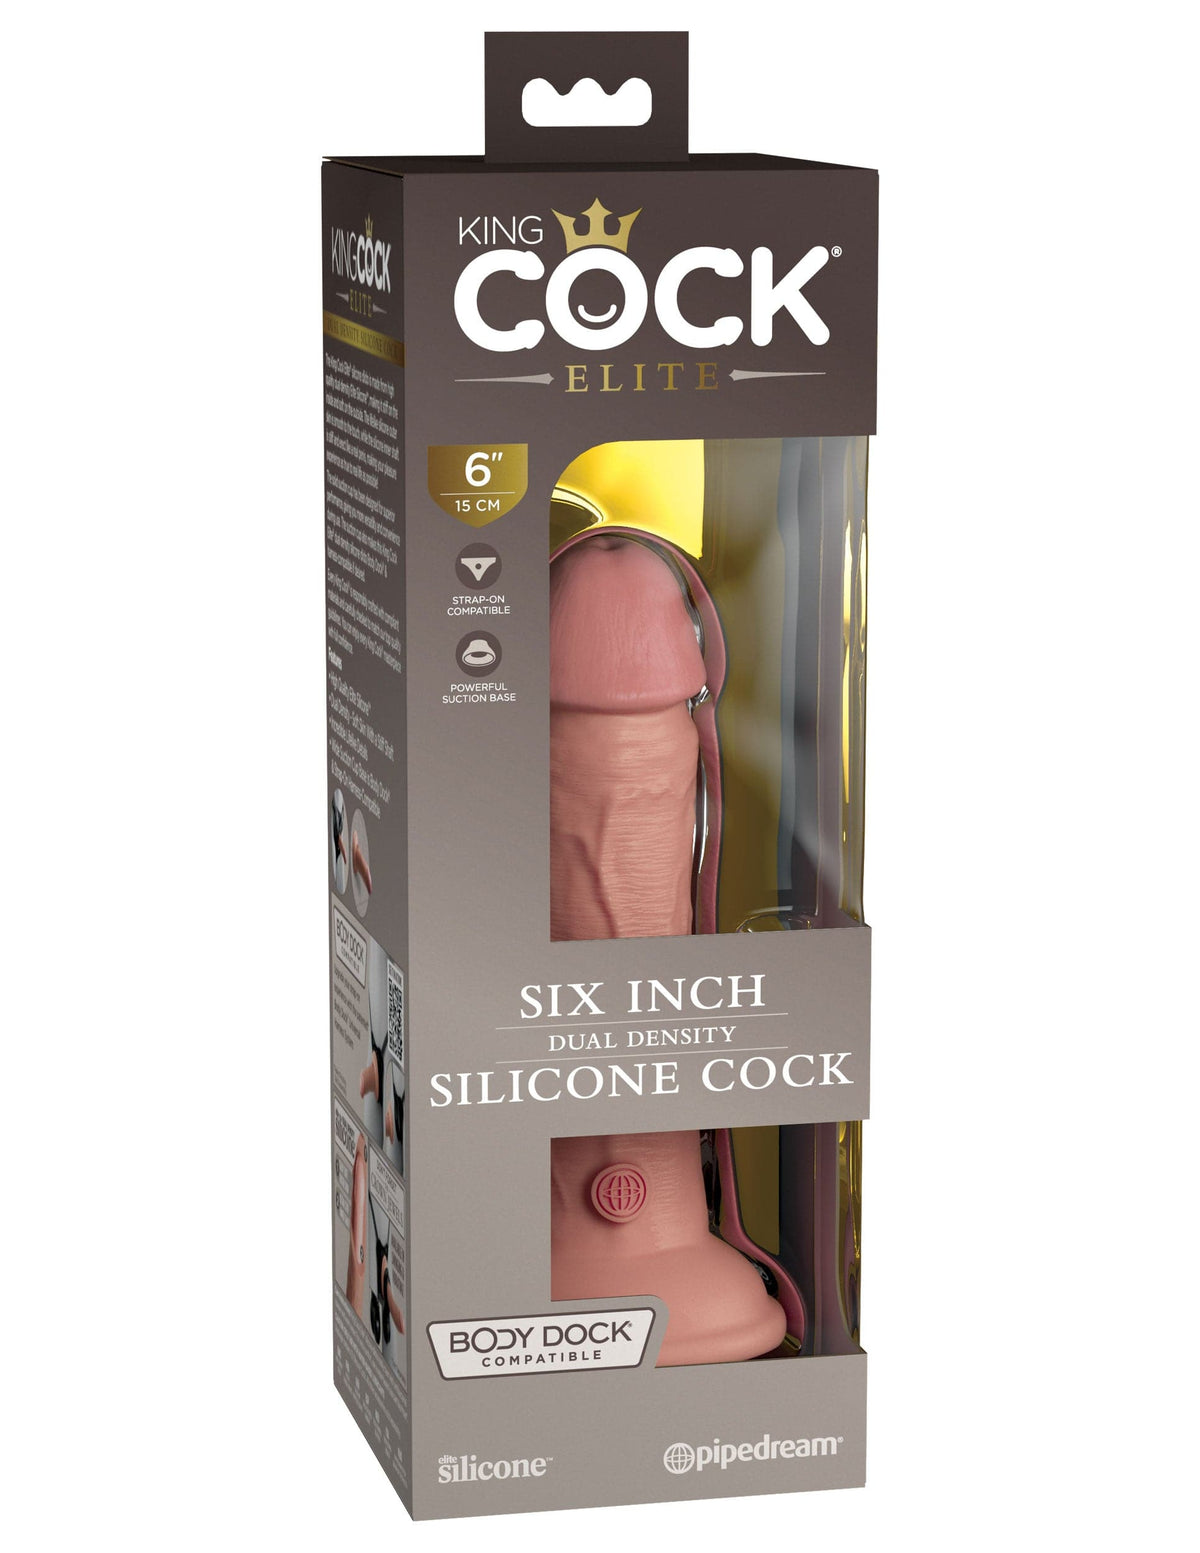 king cock elite 6 inch silicone dual density cock light